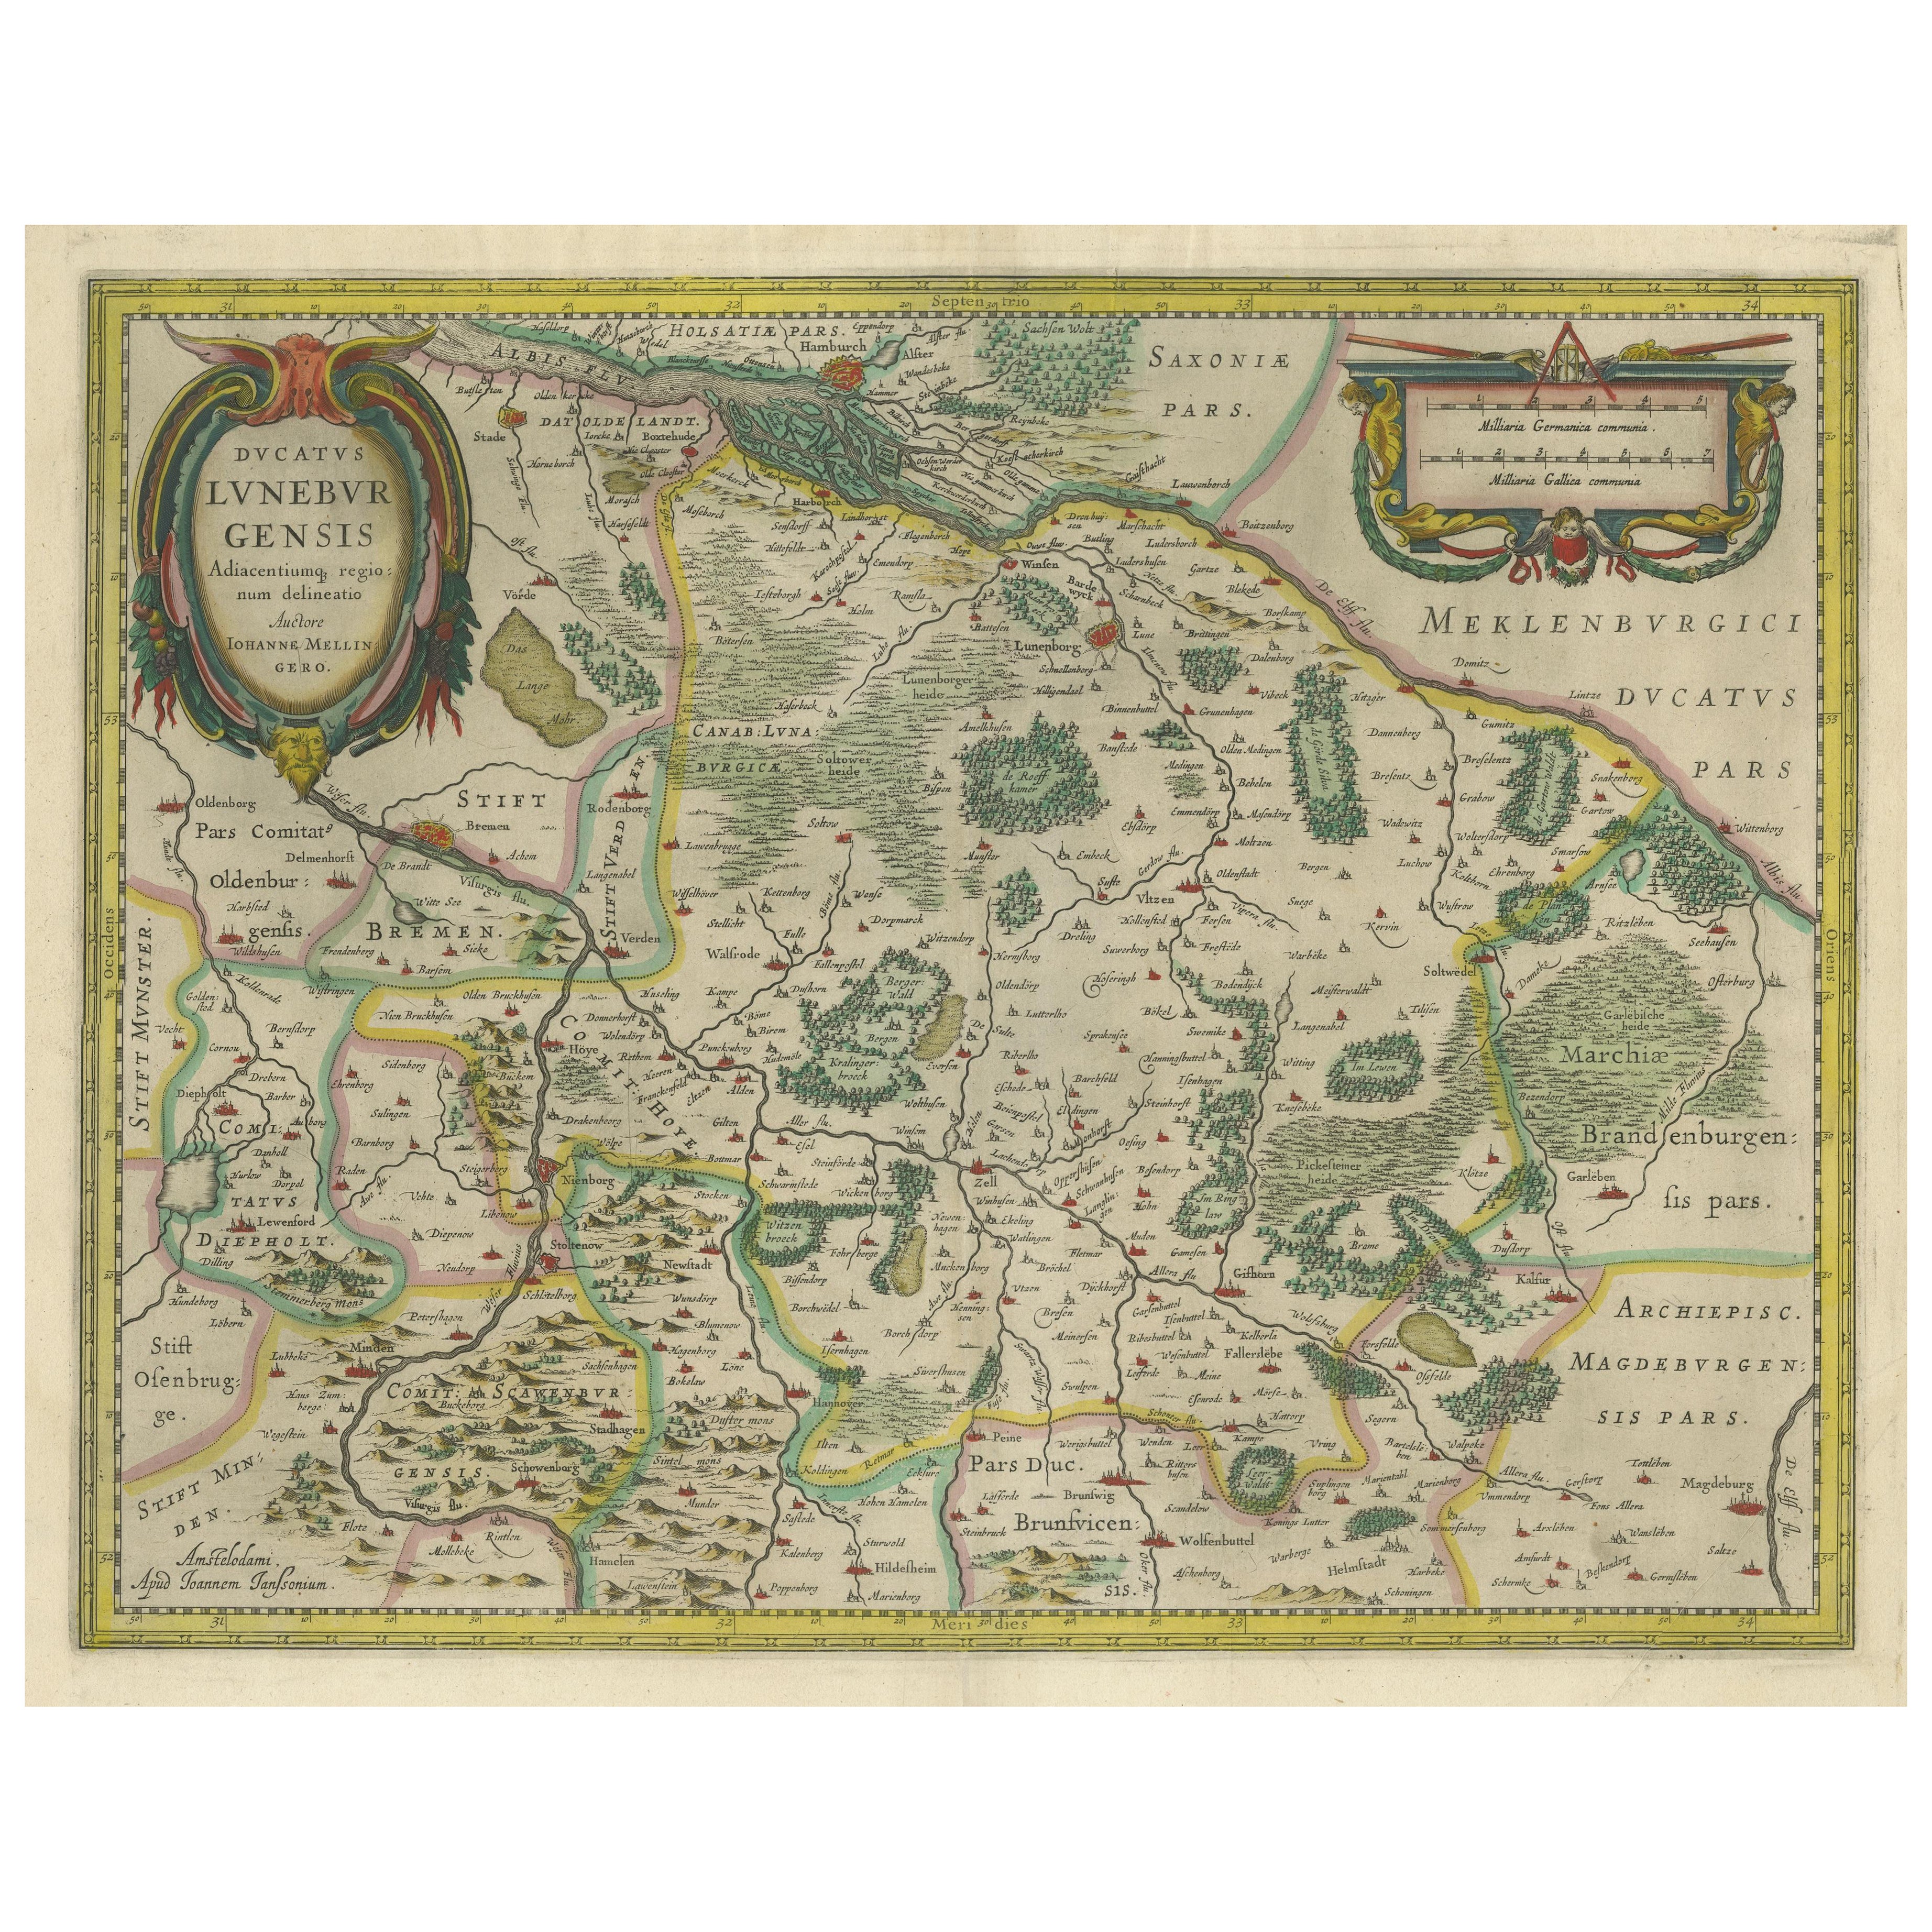 Antique Map of the Duchy of Lüneburg, Lower Saxony, Germany